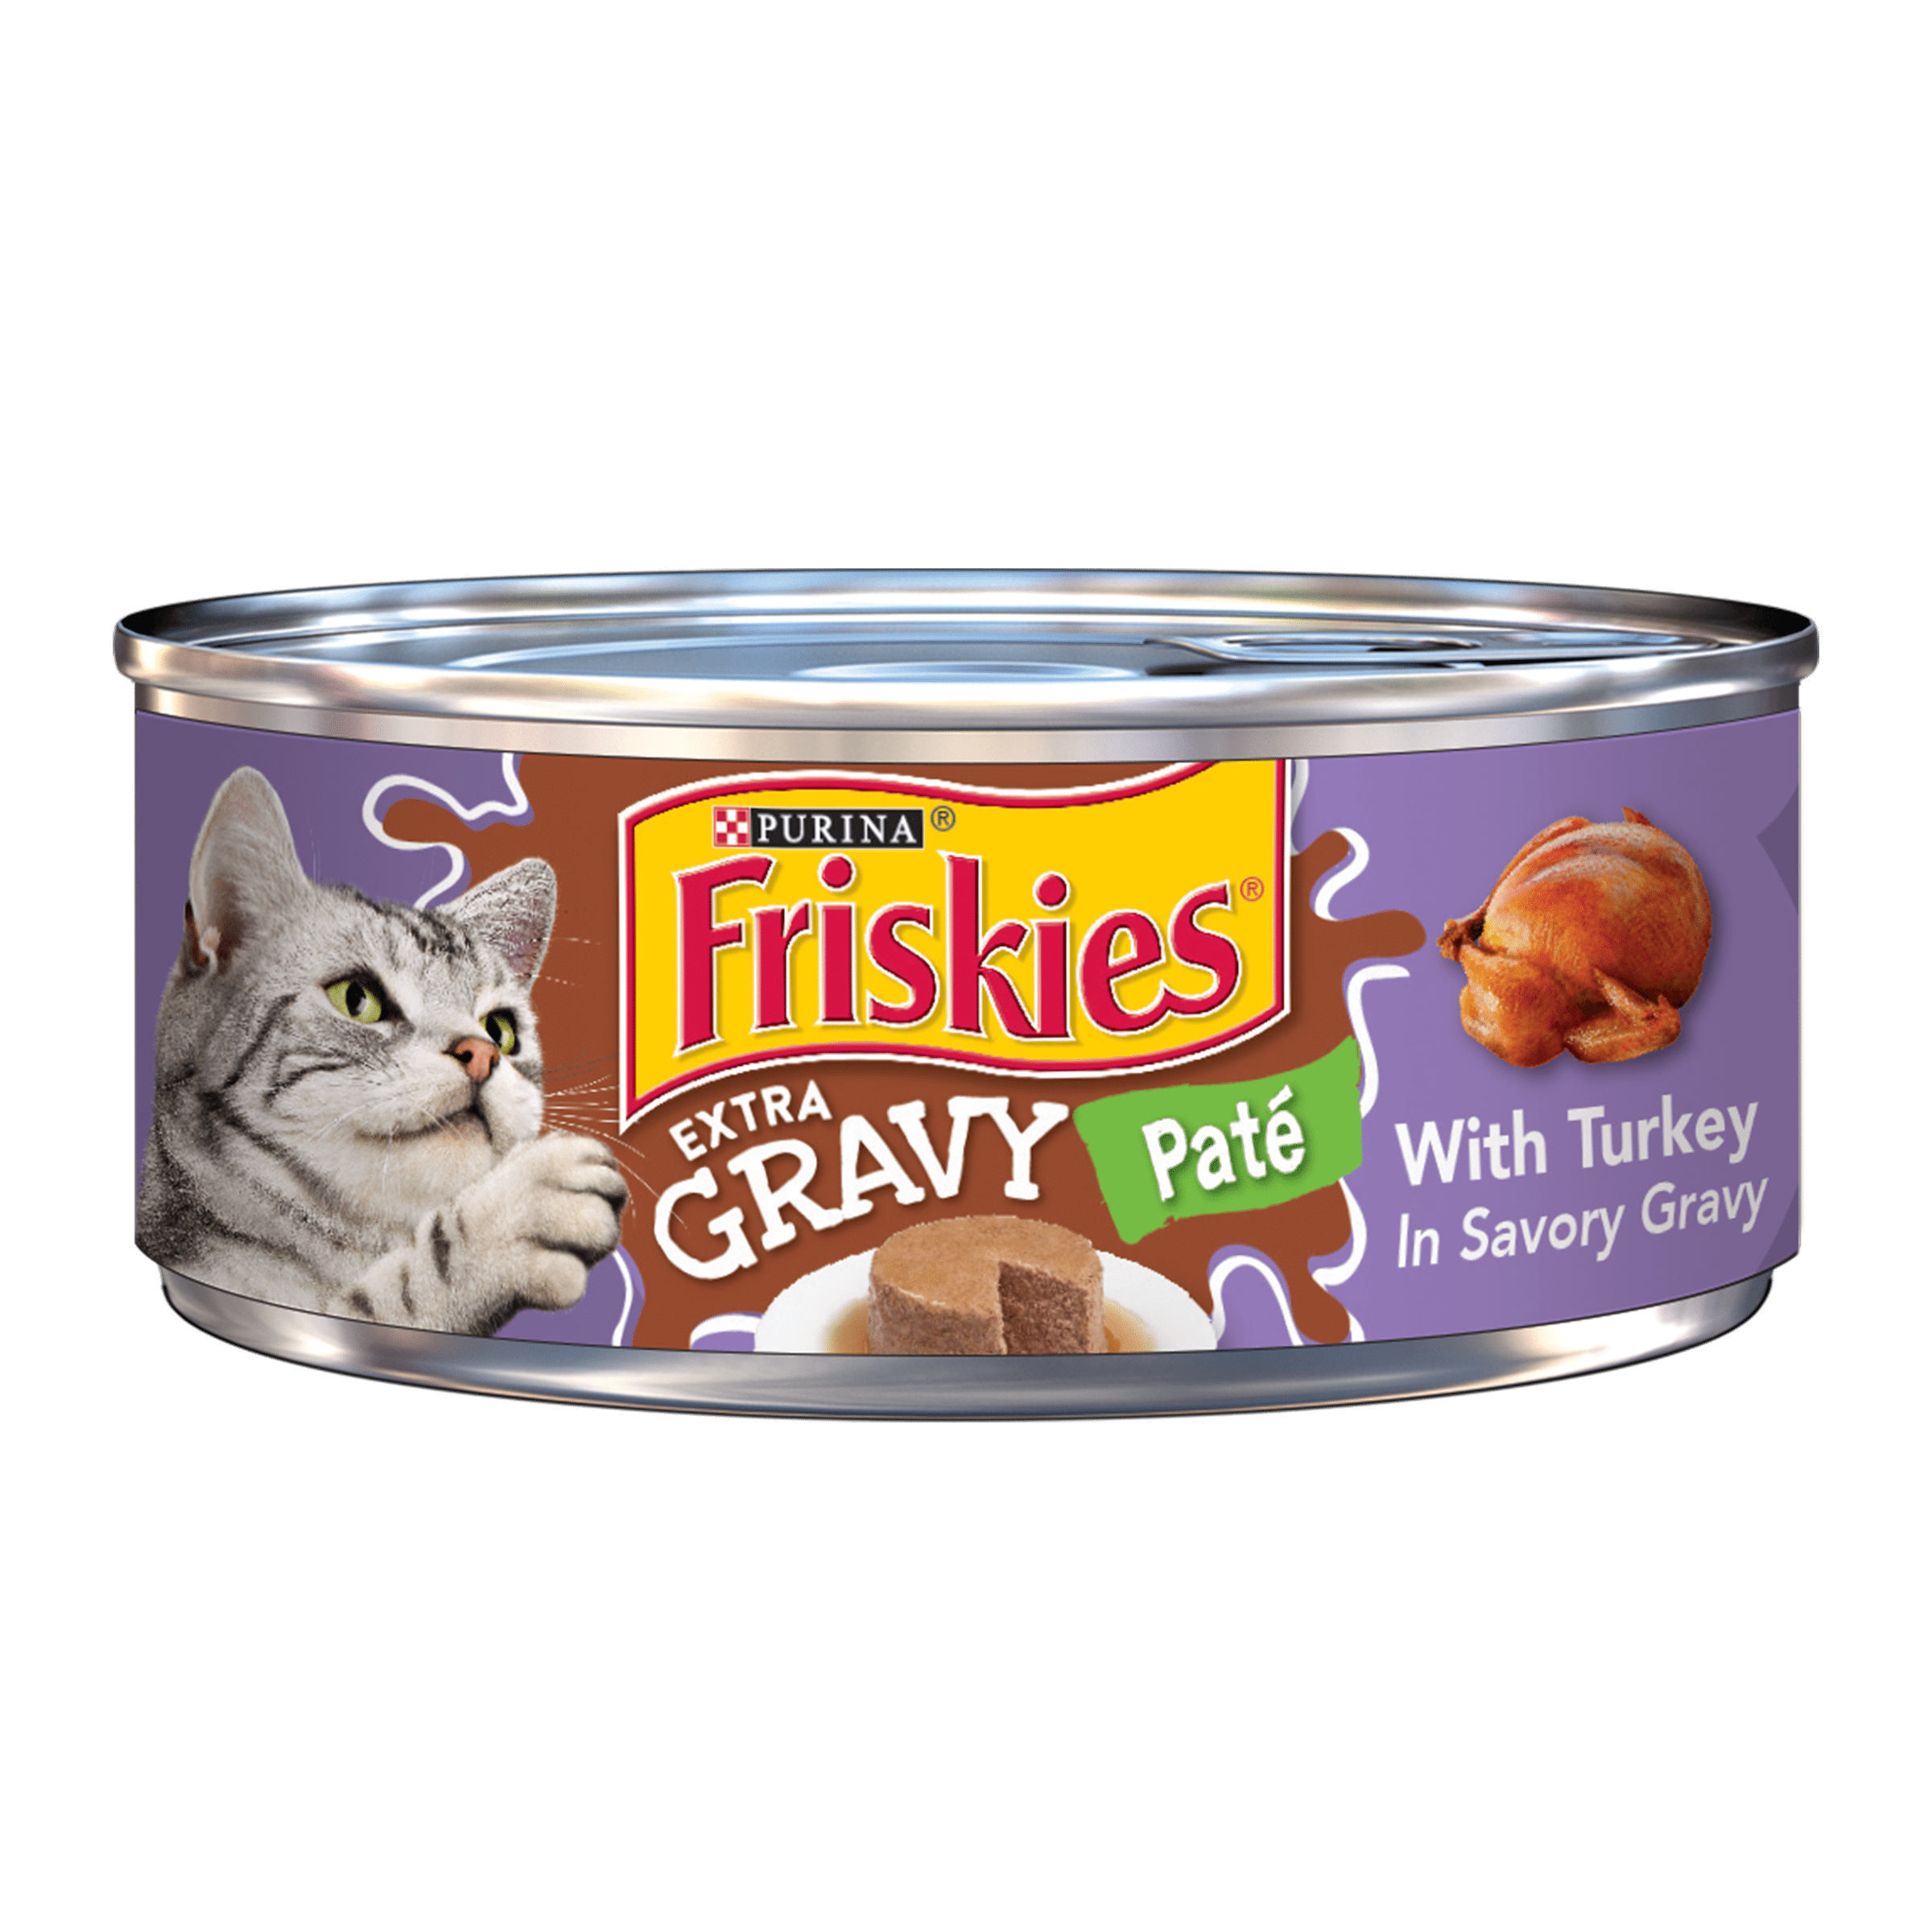 Friskies Extra Gravy Pate With Turkey in Savory Gravy Canned Cat Food